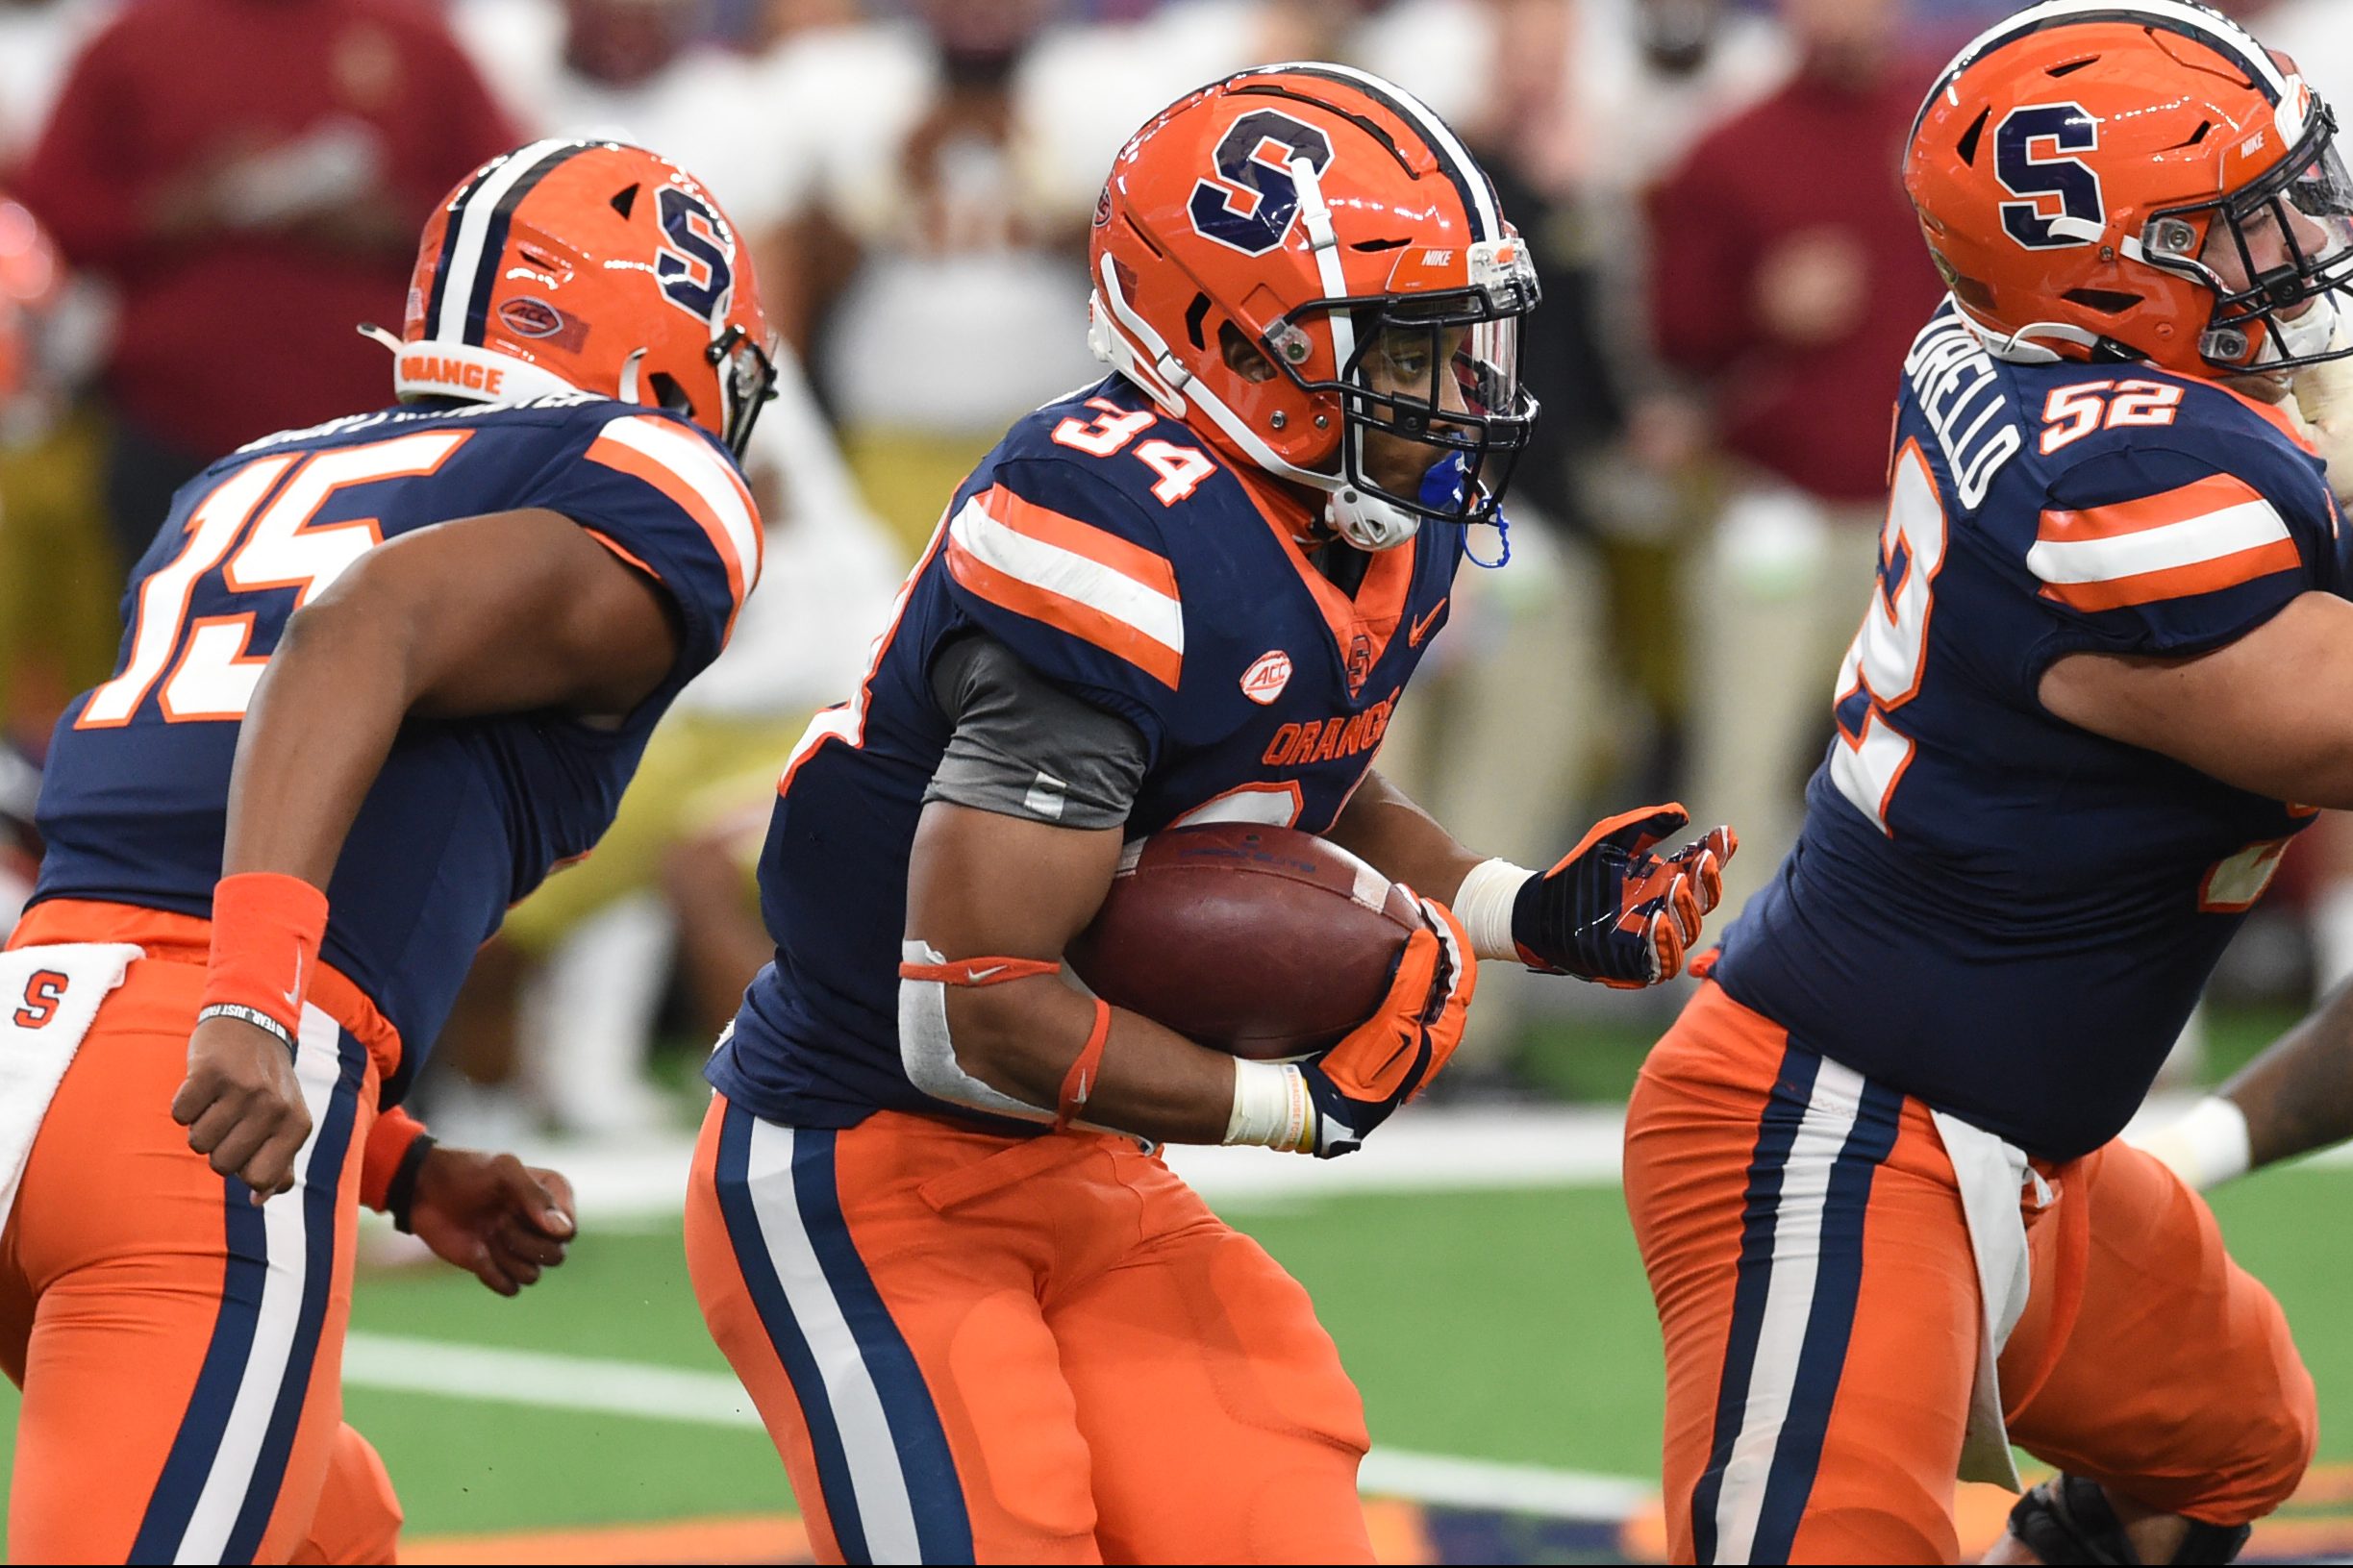 Syracuse Orange running back Sean Tucker (34) during a game against Boston College on Saturday, Nov. 7, 2020, at the Carrier Dome in Syracuse, N.Y.